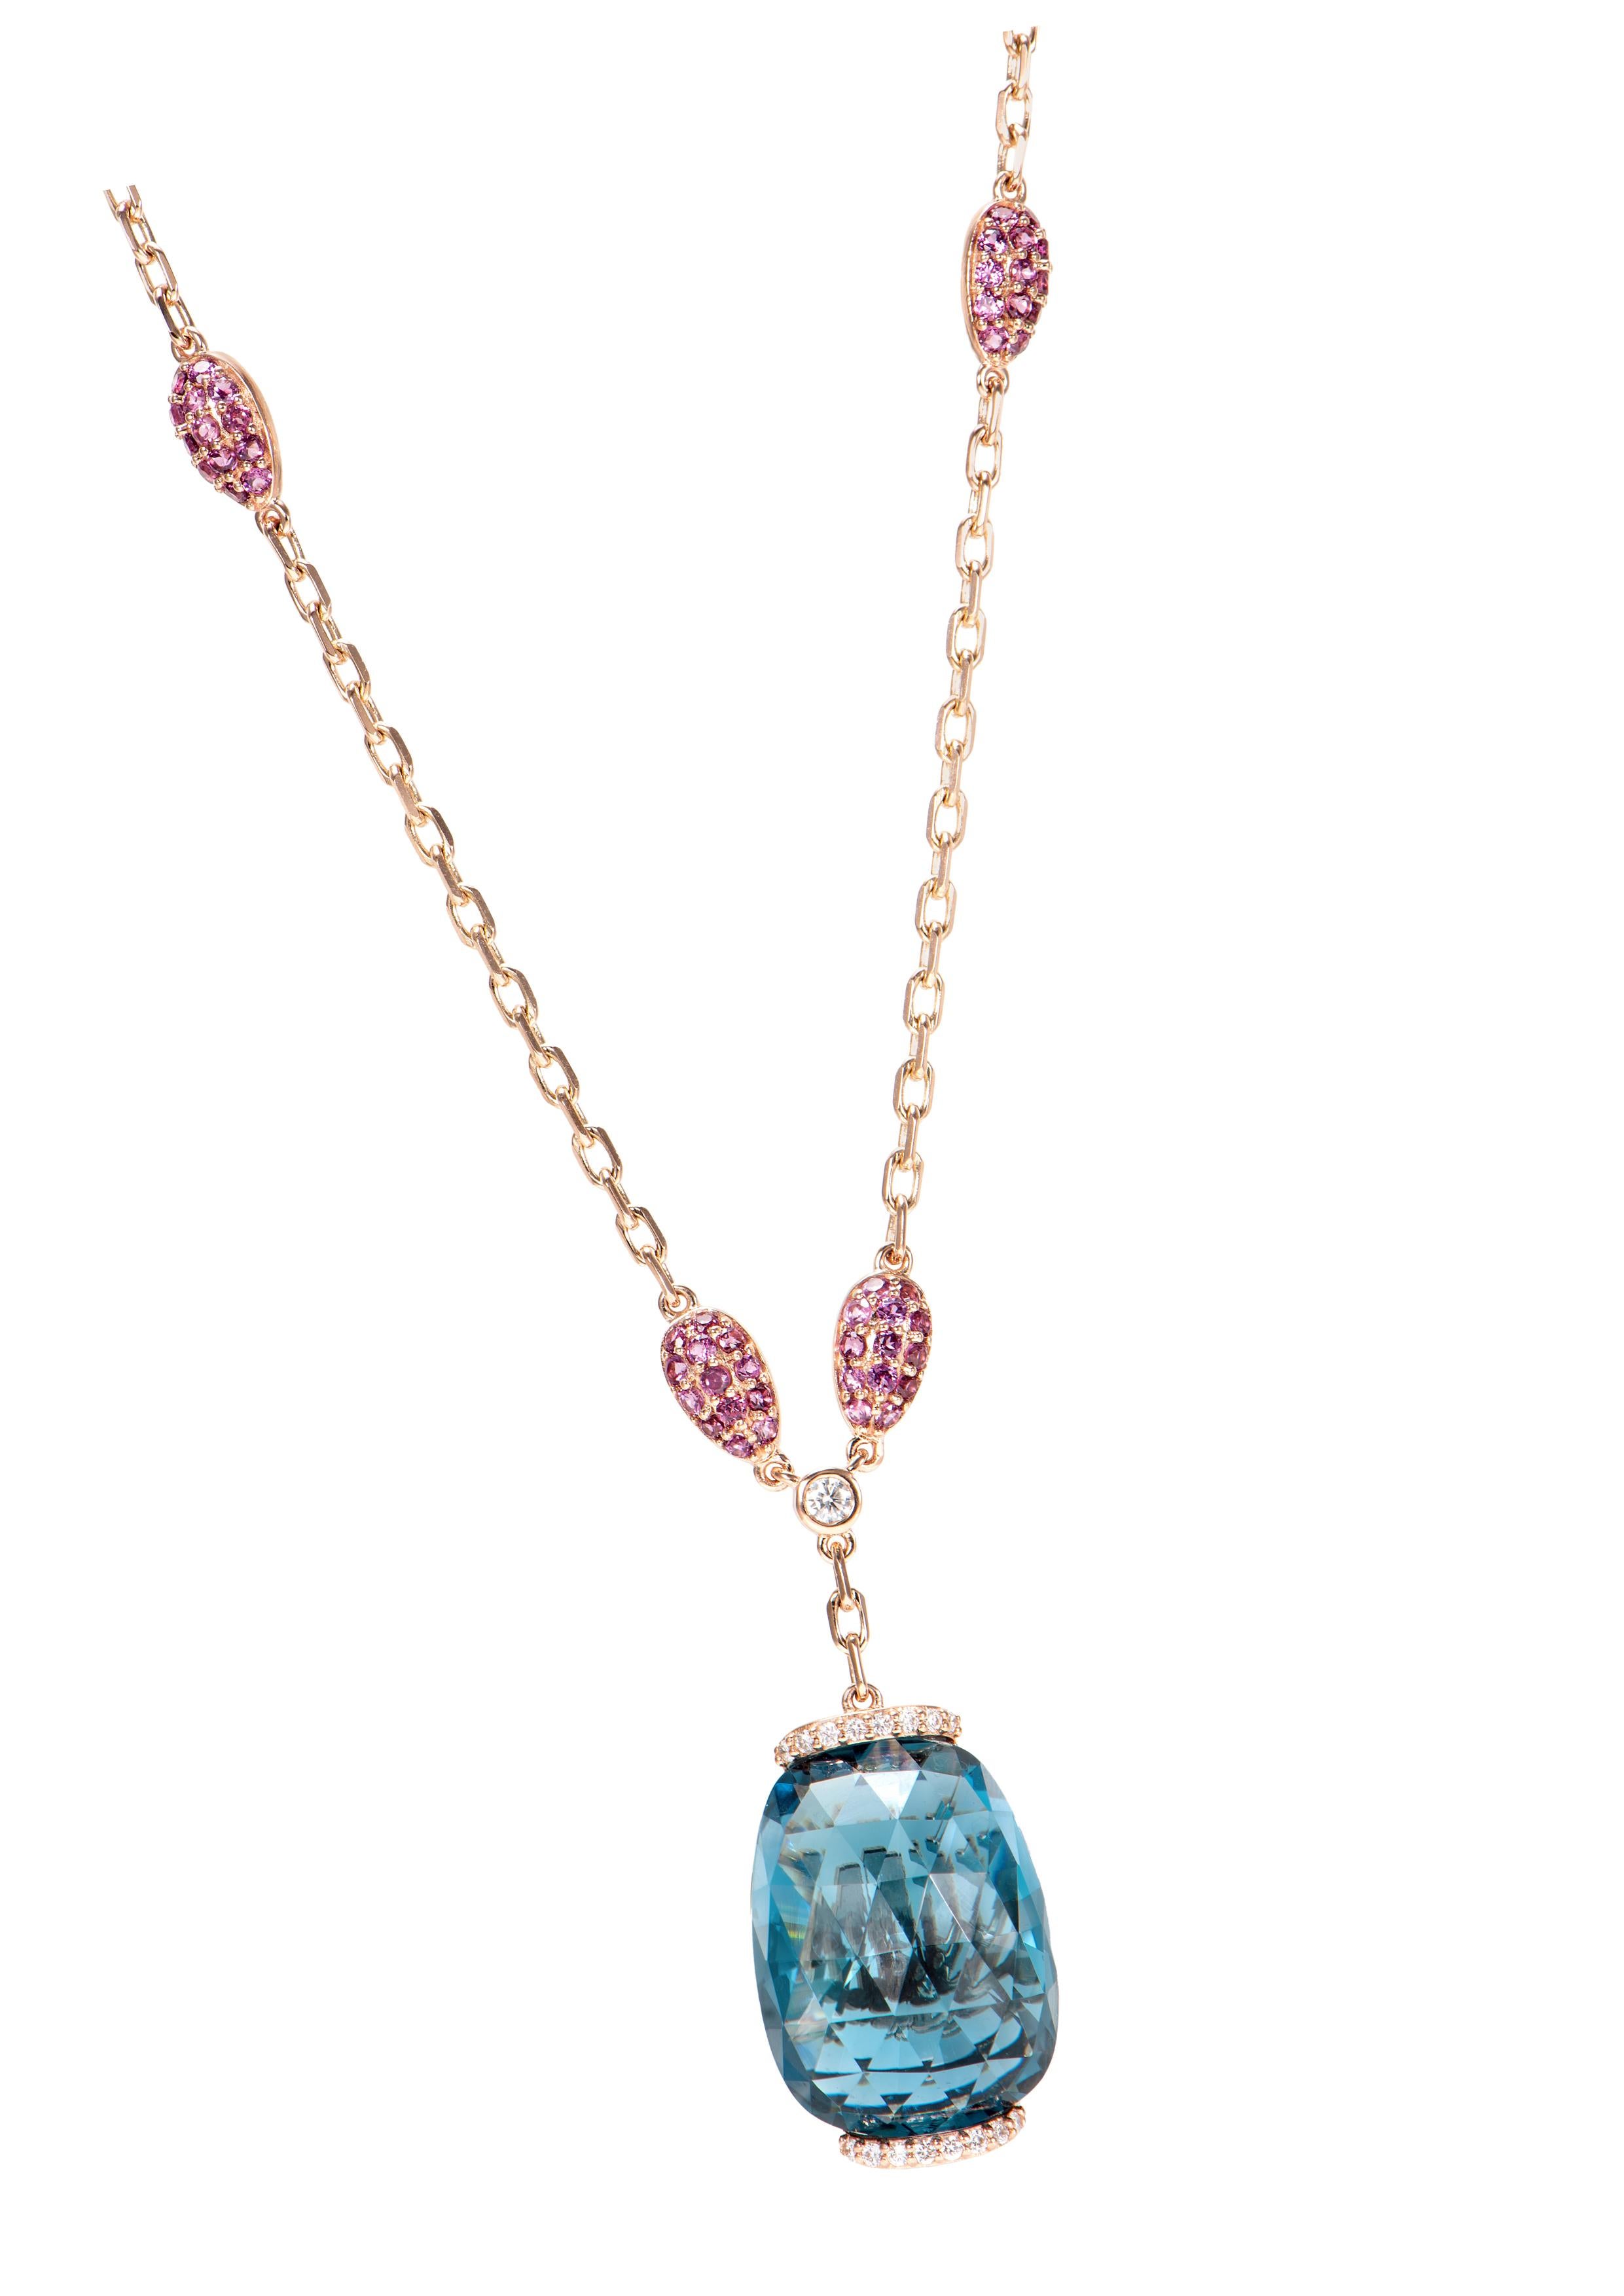 An exclusive collection of designer and unique Pendant by Sunita Nahata Fine Design.
Accented with diamonds these Pendants are made in Rose gold and present a classic yet elegant look. 

London Blue Topaz Pendant with Rhodolite and White Diamond in